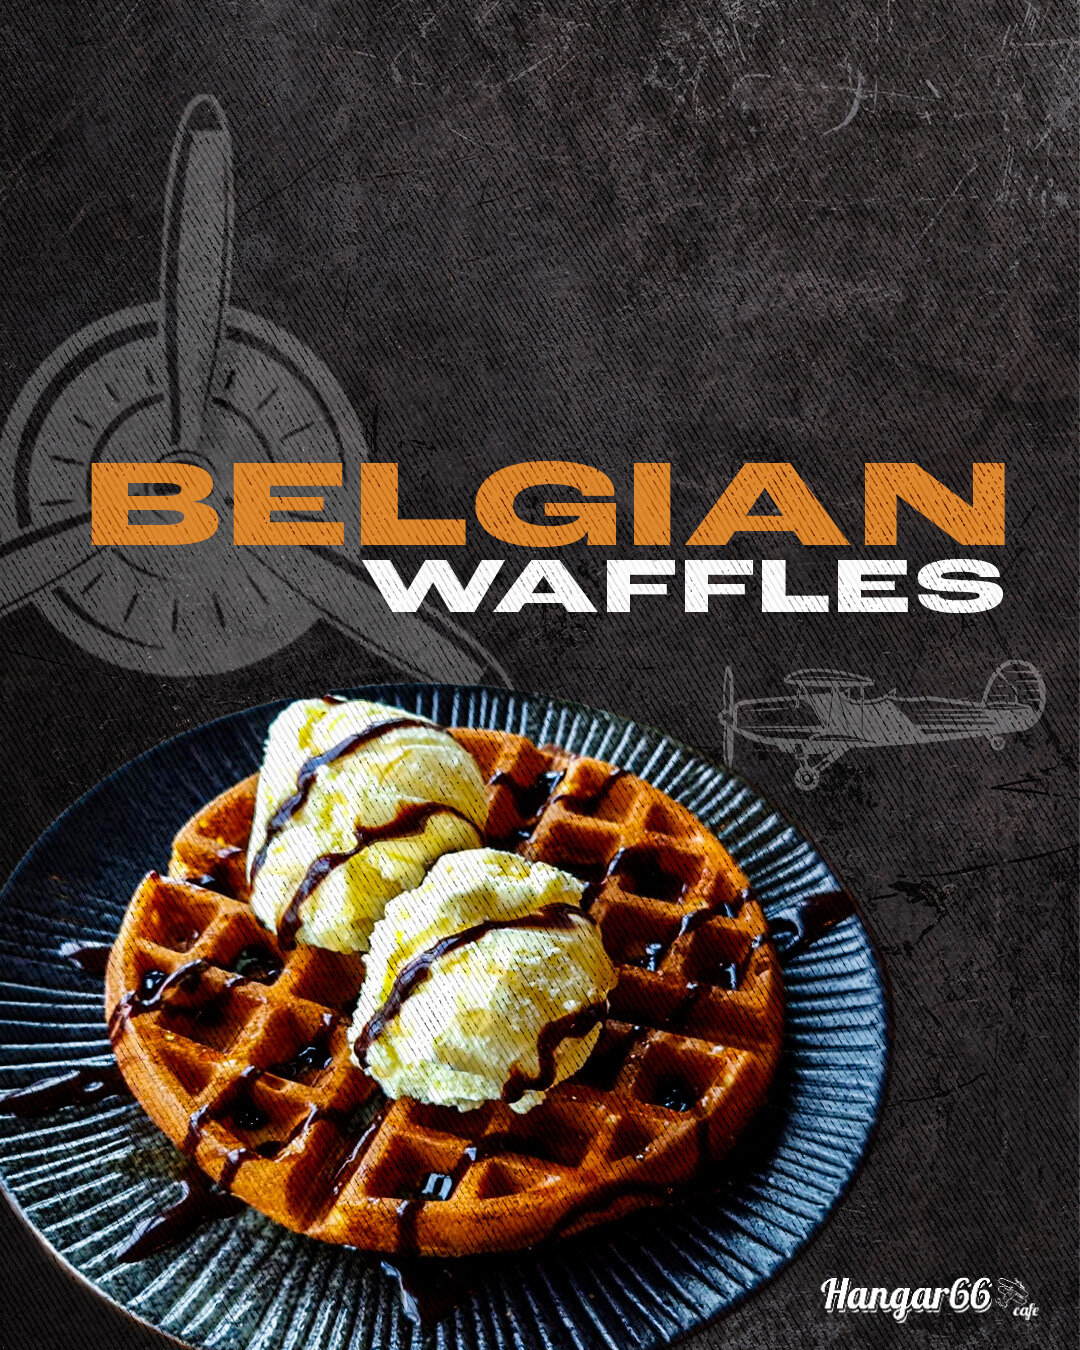 Take your taste buds on a decadent journey with our new Belgian Waffles!

Generously topped with two generous scoops of ice cream of your choice and drizzled with rich, velvety chocolate sauce. Every bite is a heavenly combination of warm, fluffy waf